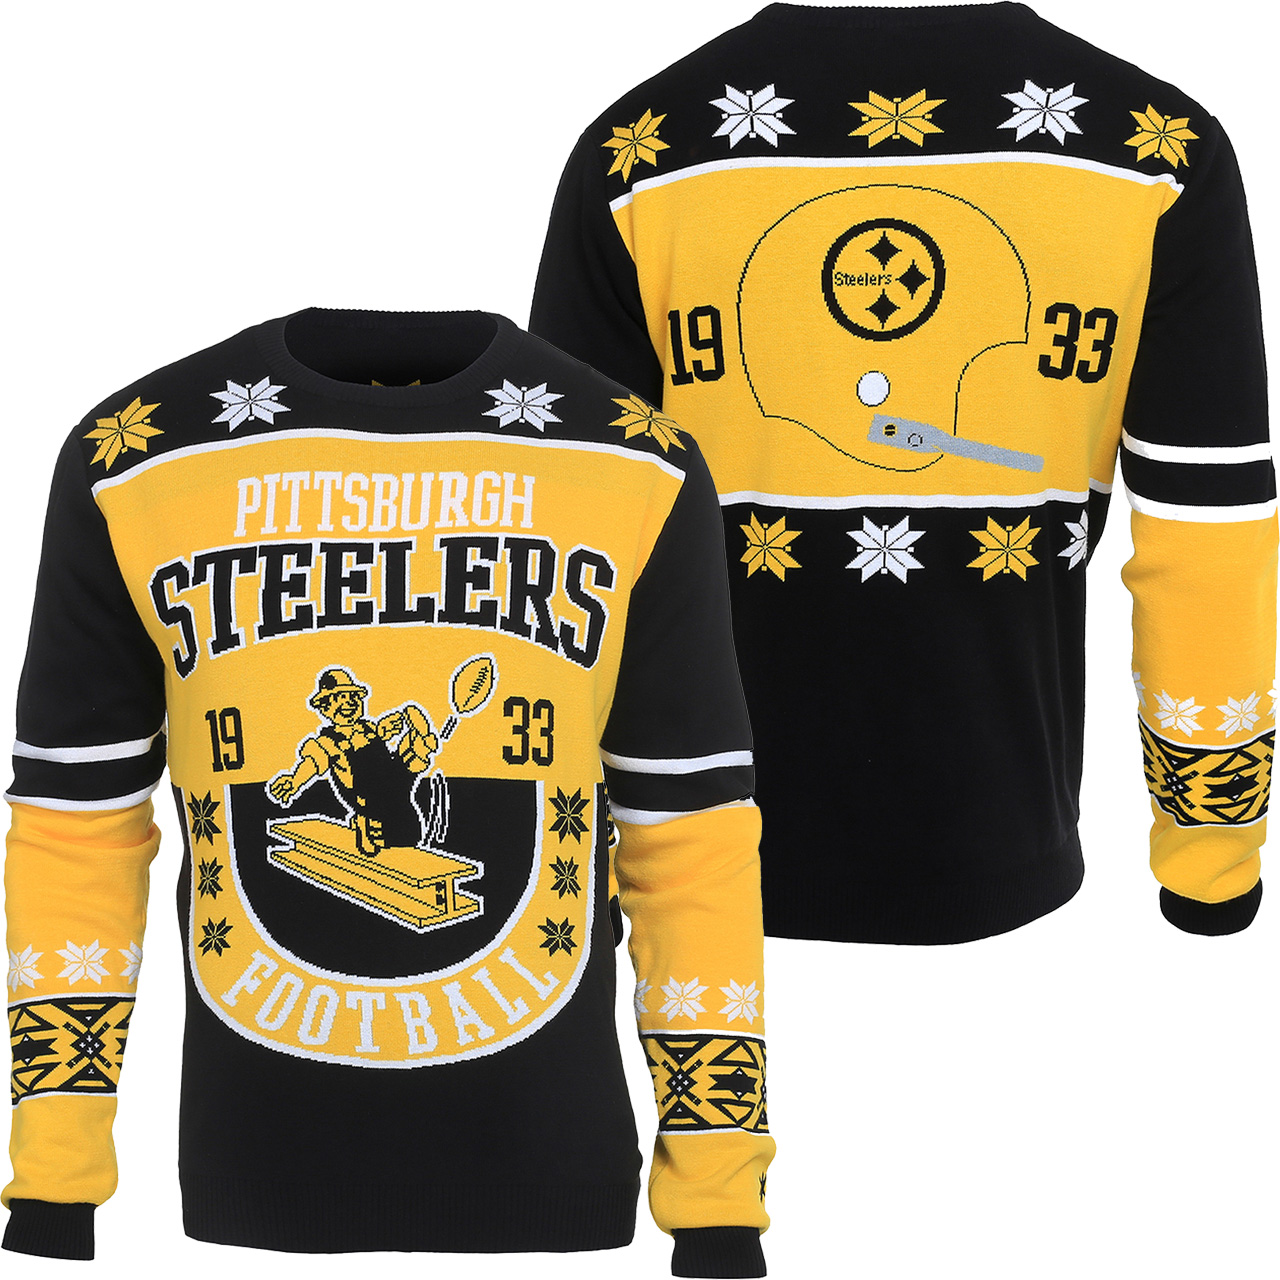 Pittsburgh Steelers NFL Retro Cotton Sweater